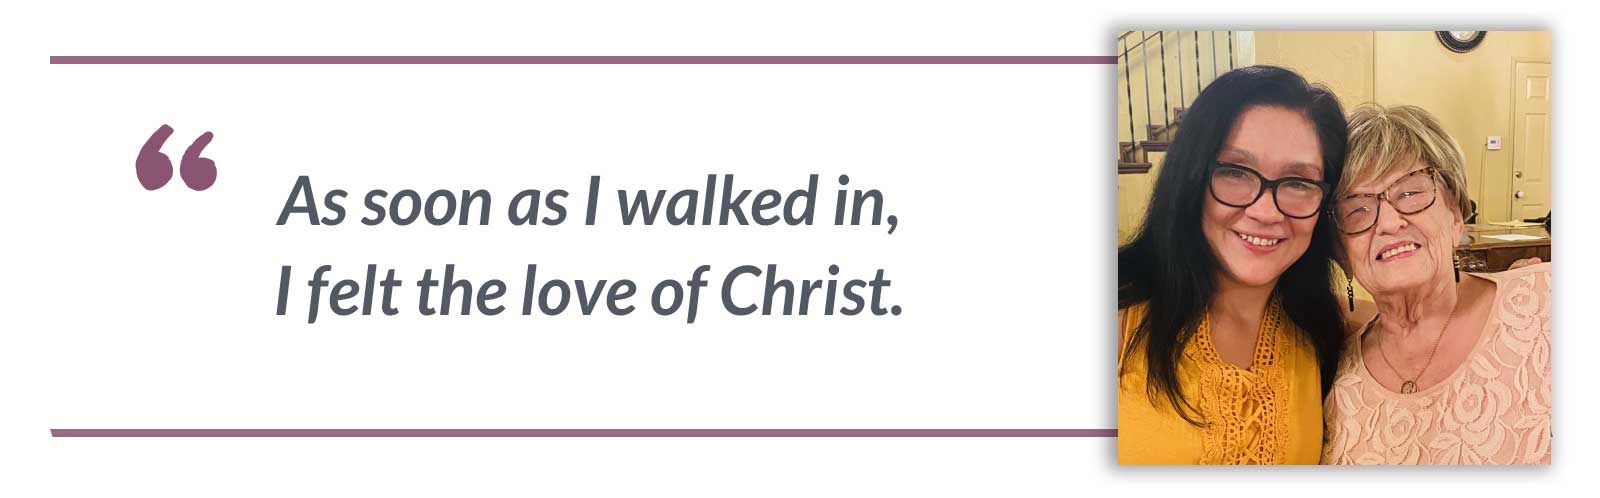 As soon as I walked in, I felt the love of Christ.-Maria